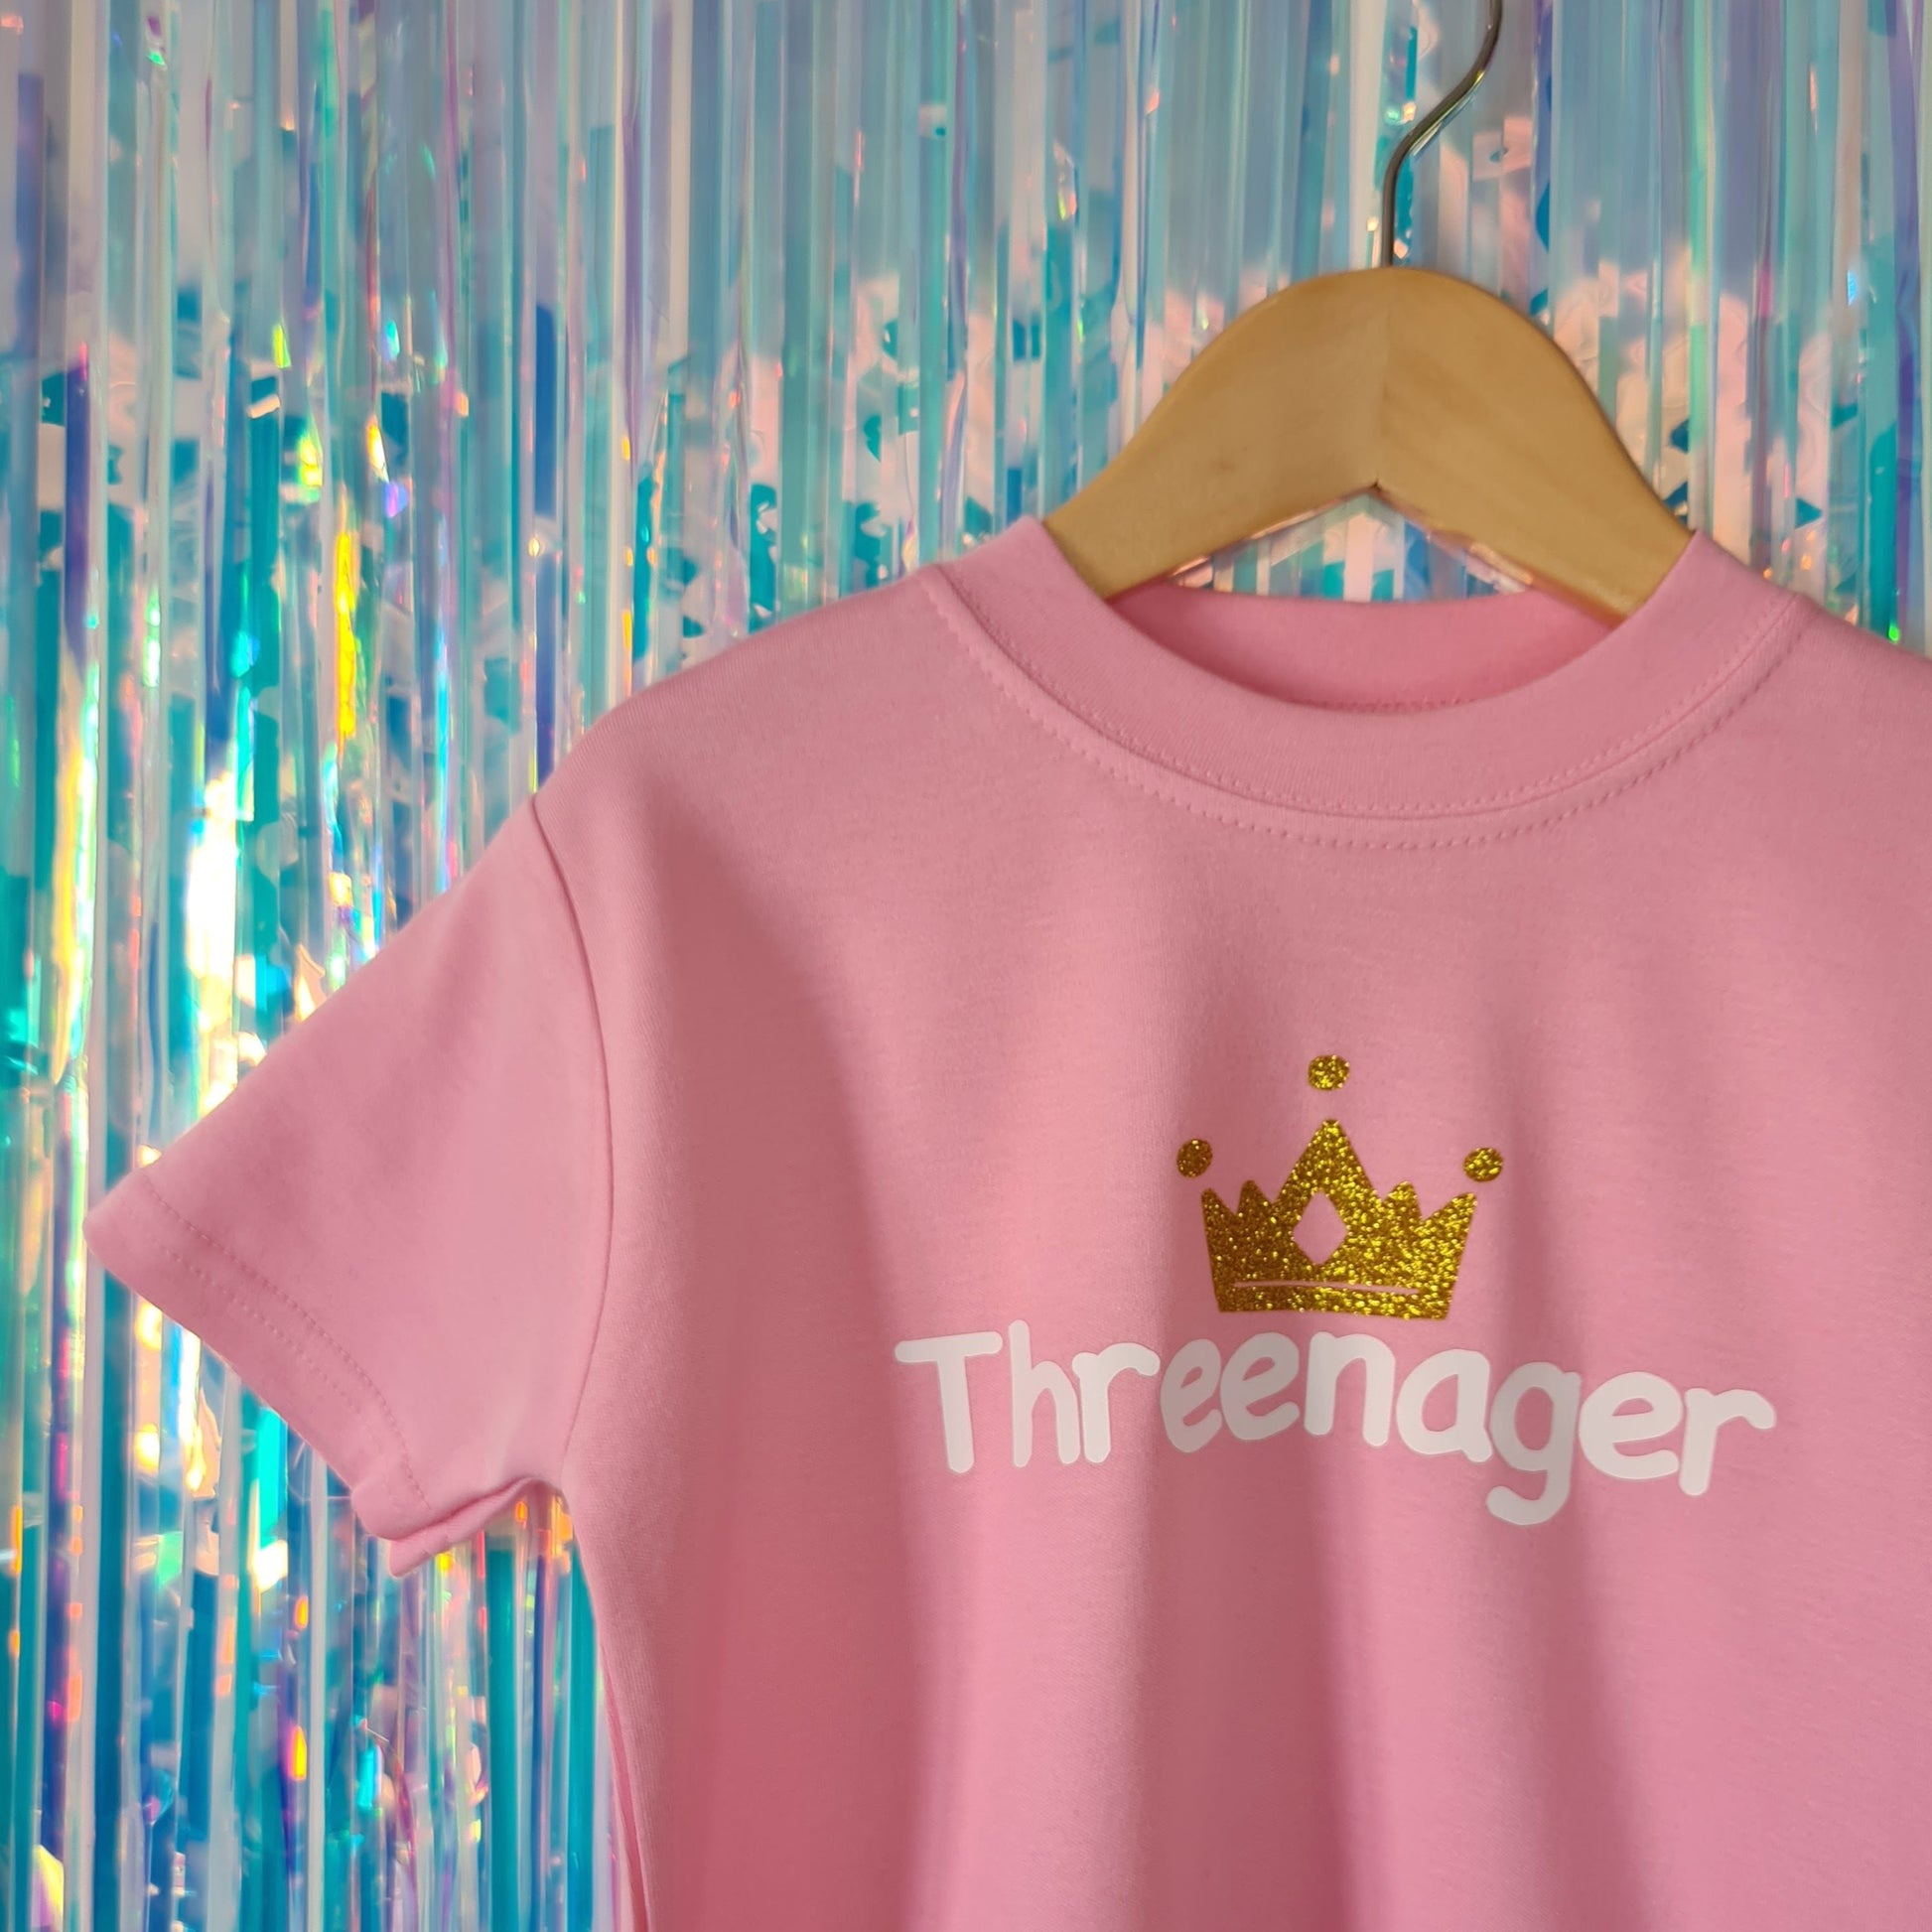 Threenager - pale pink tshirt with white text and gold glitter crown